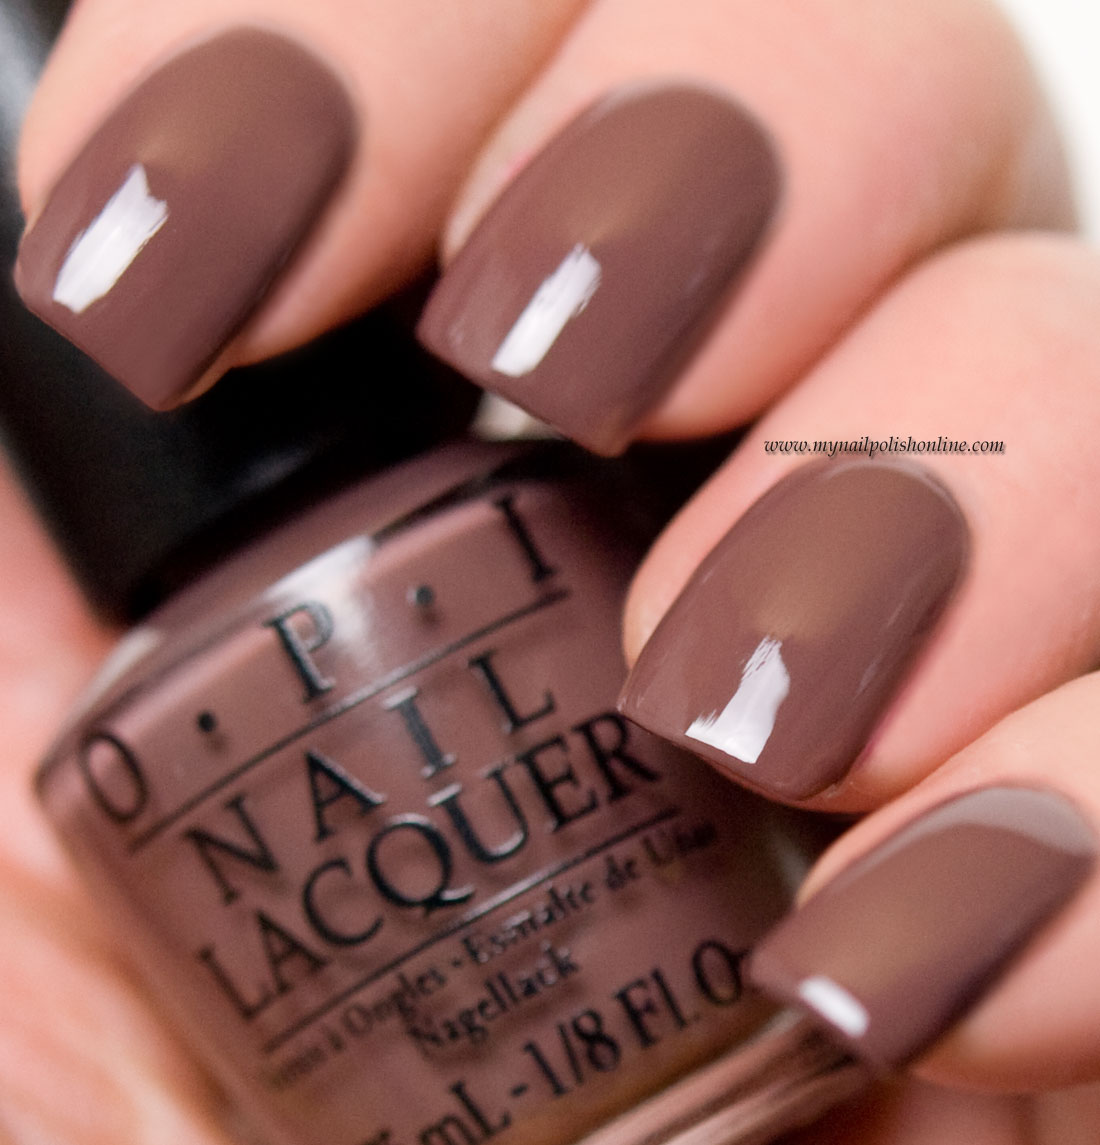 OPI - Squeaker of the house - My Nail Polish Online